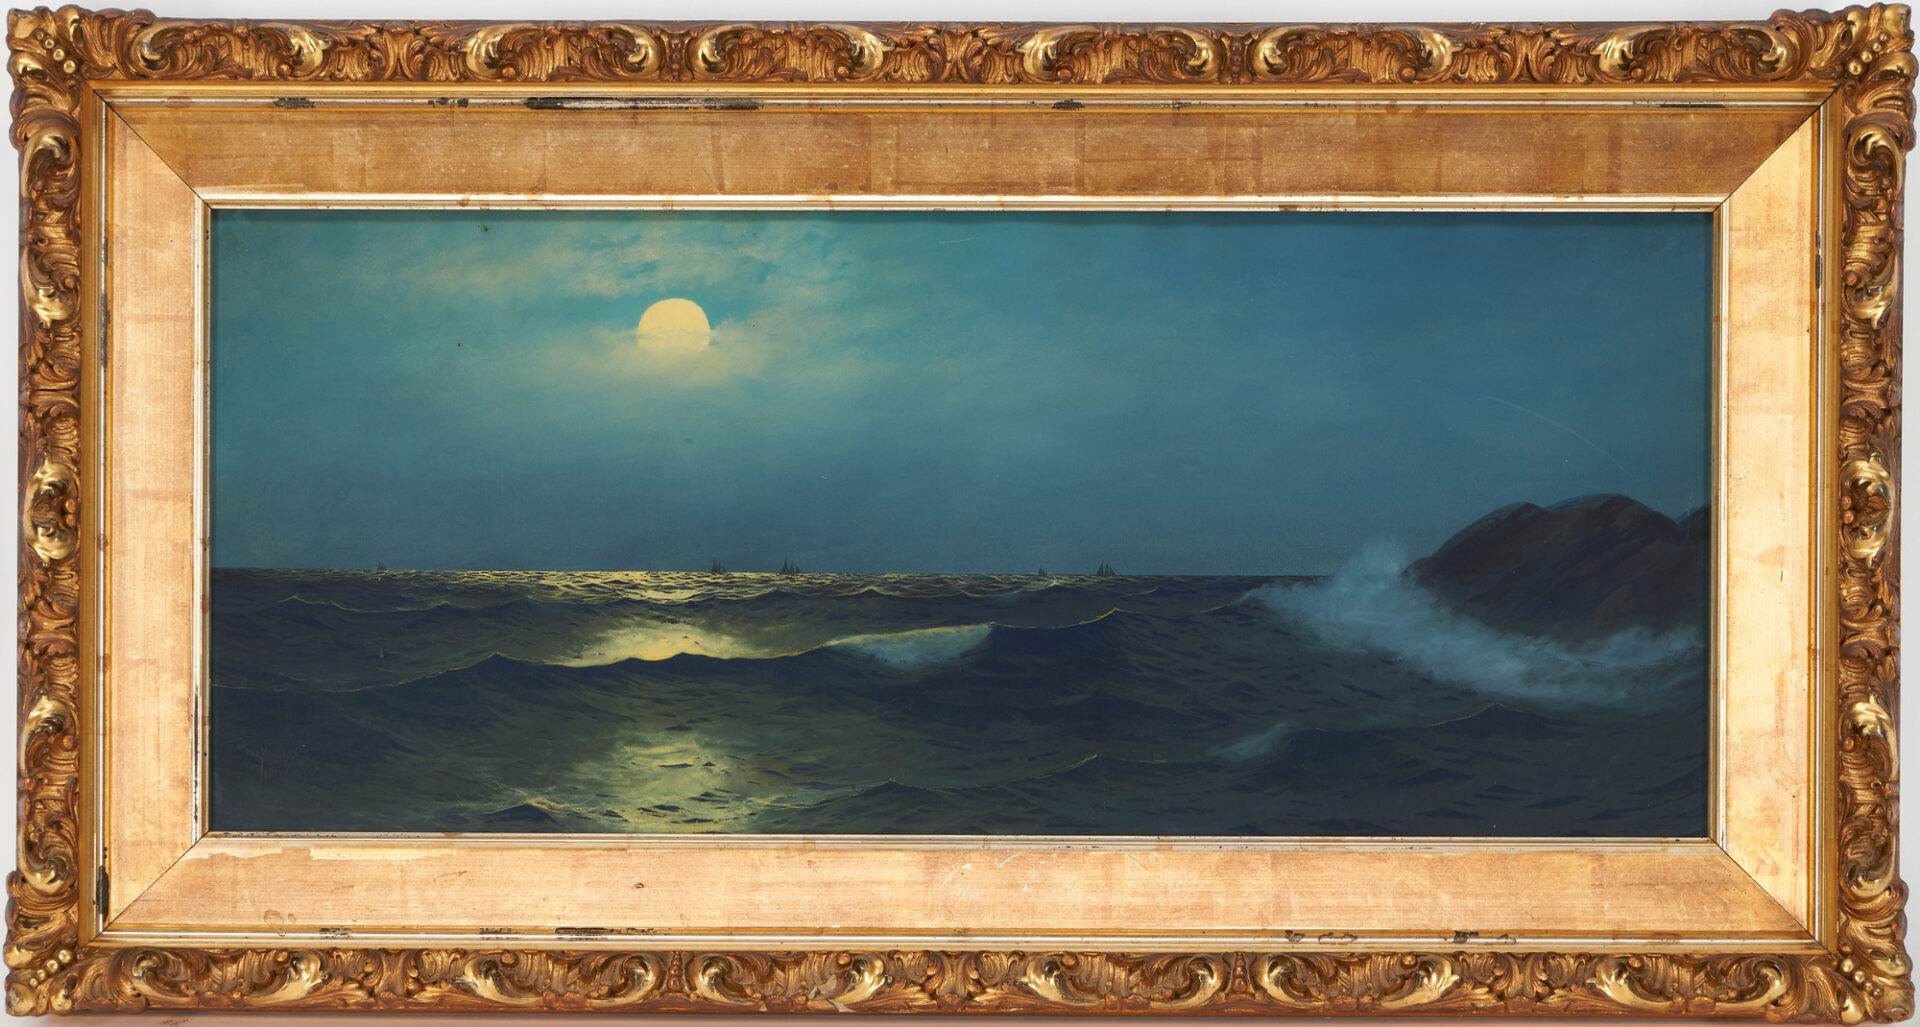 Lot 1045: Marine Seascape Painting of Night Sky with Moonlit Waves